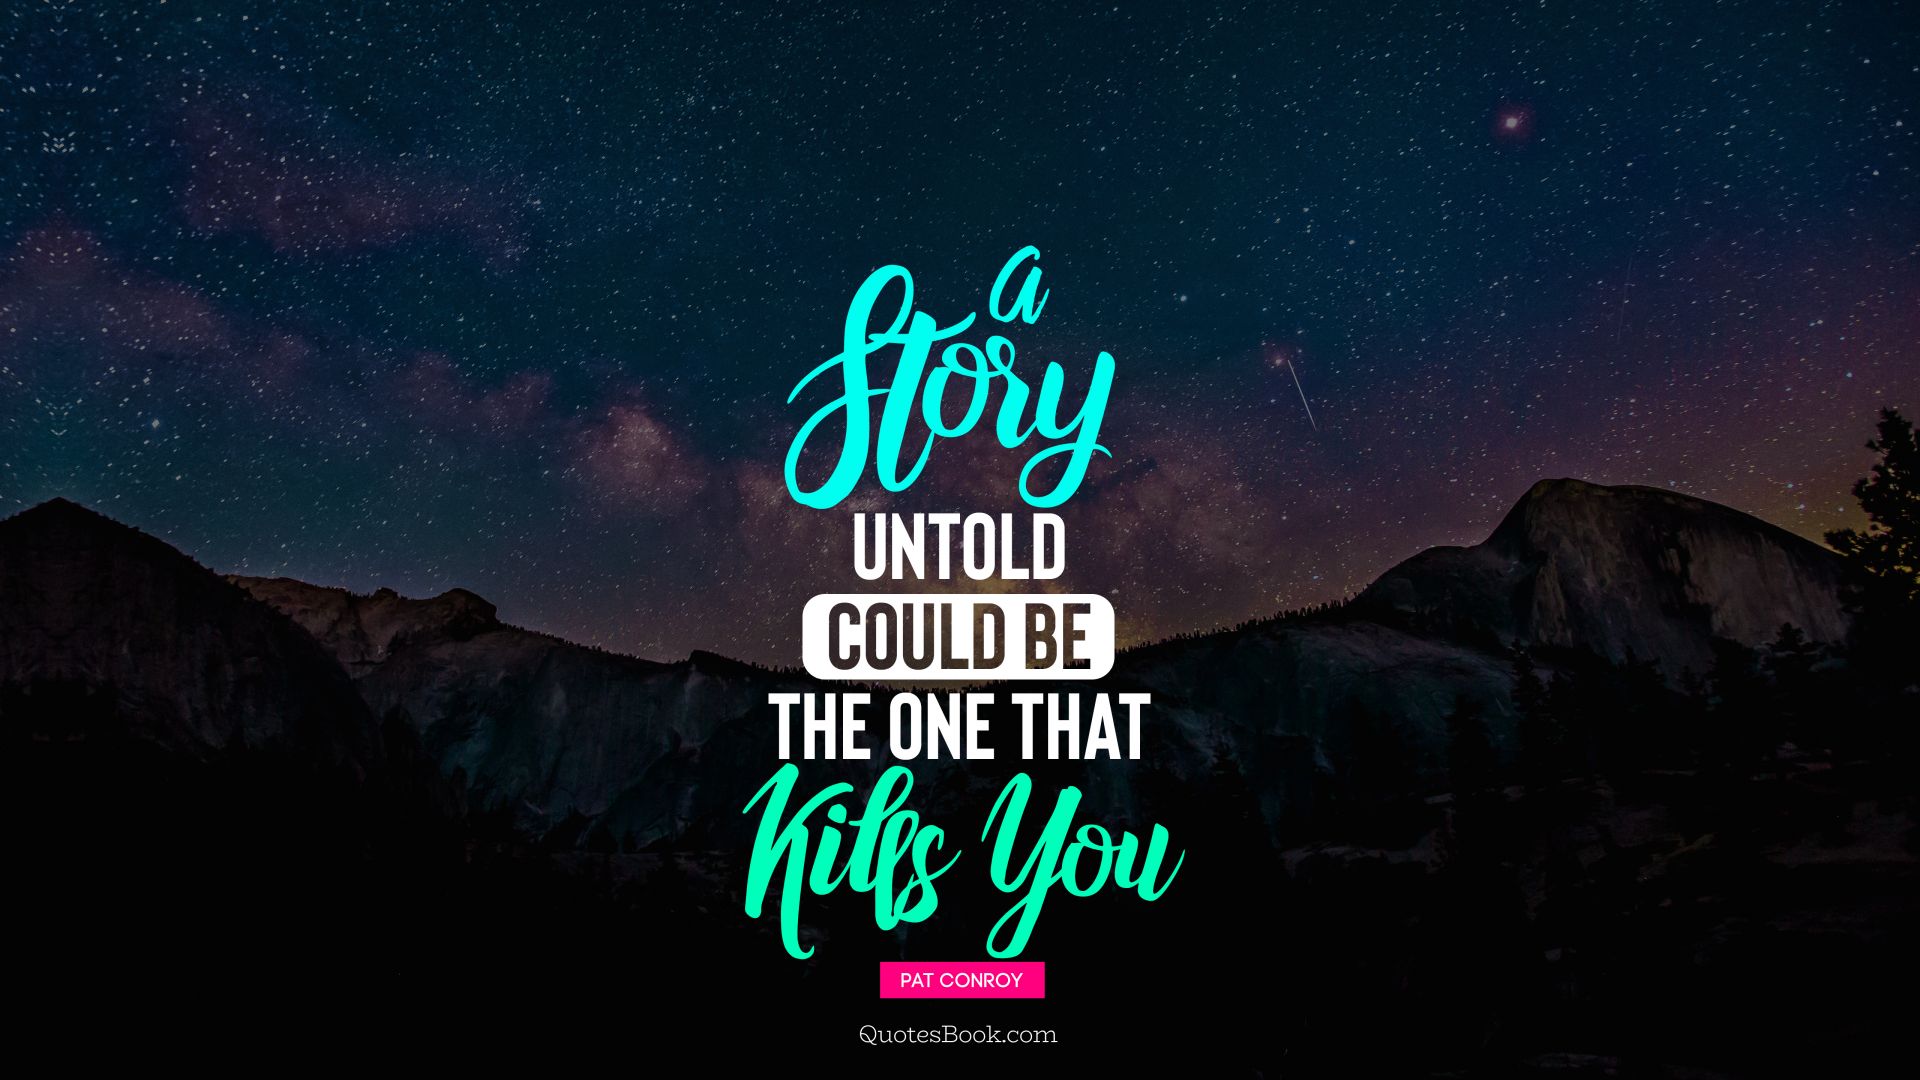 A story untold could be the one that kills you. - Quote by Pat Conroy